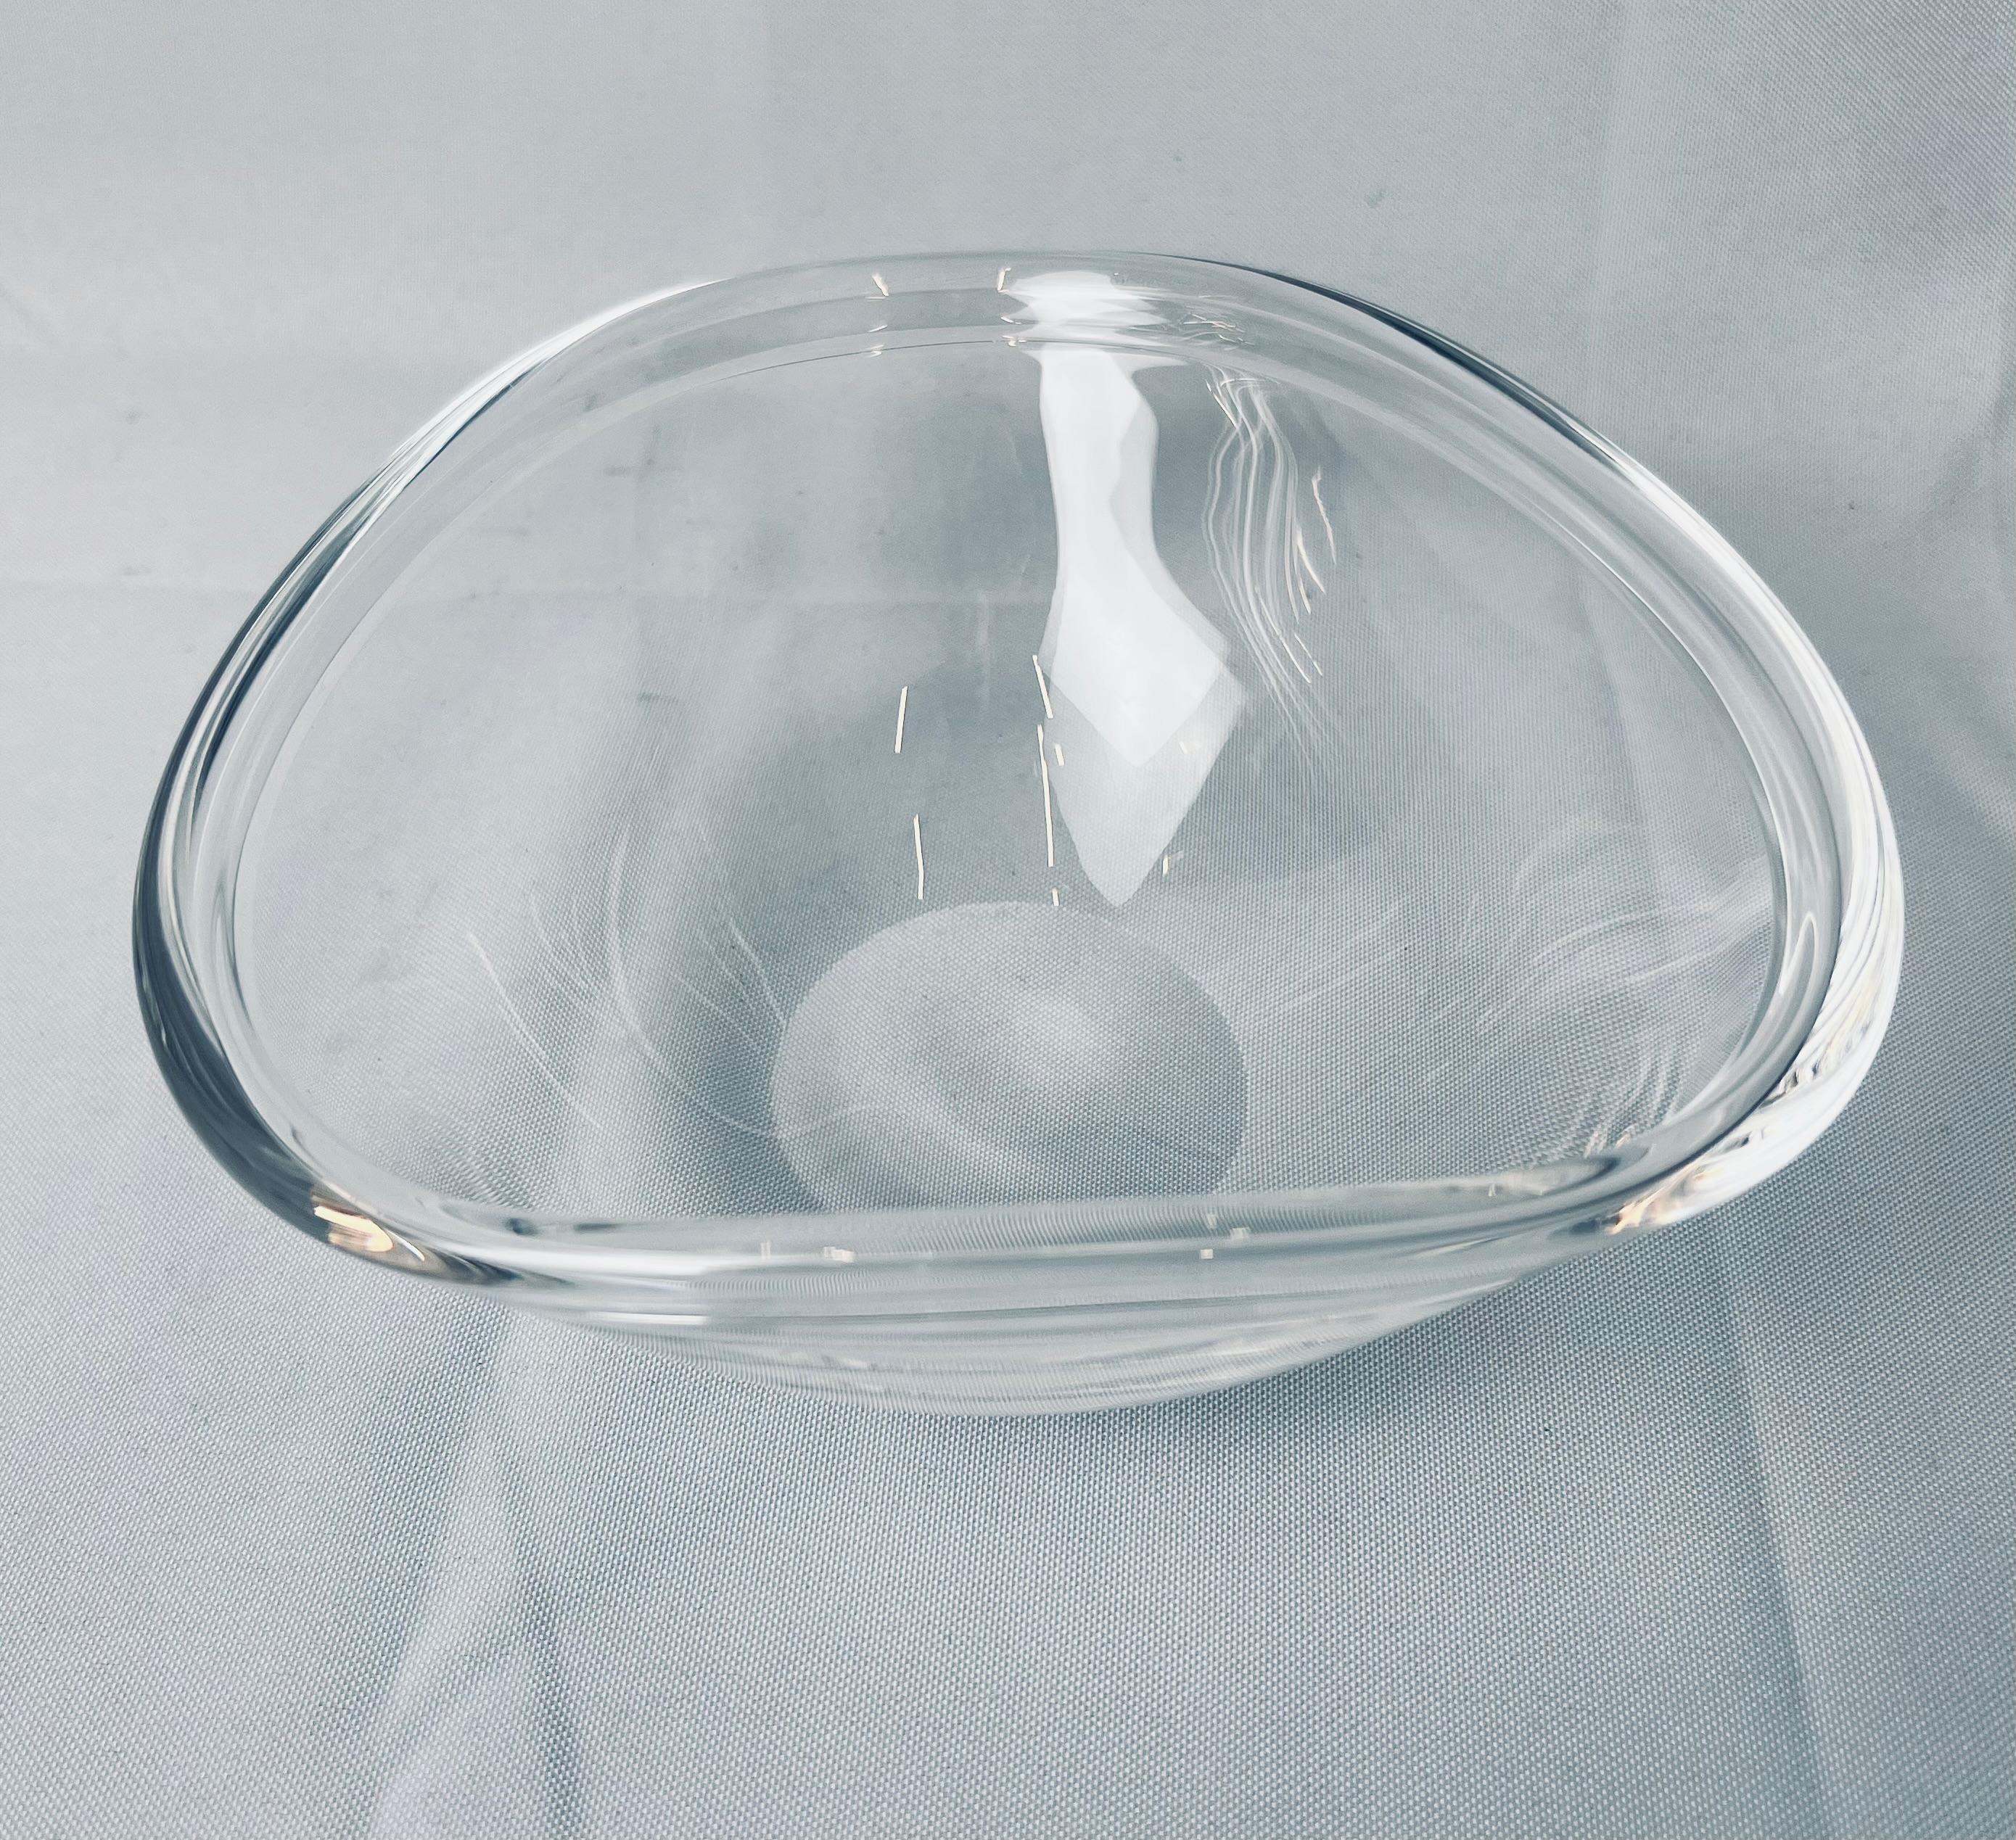 Steuben clear glass blown bowl with a wavy rolled over edge. The underside is polished and scribe signed.

Measures: H-3